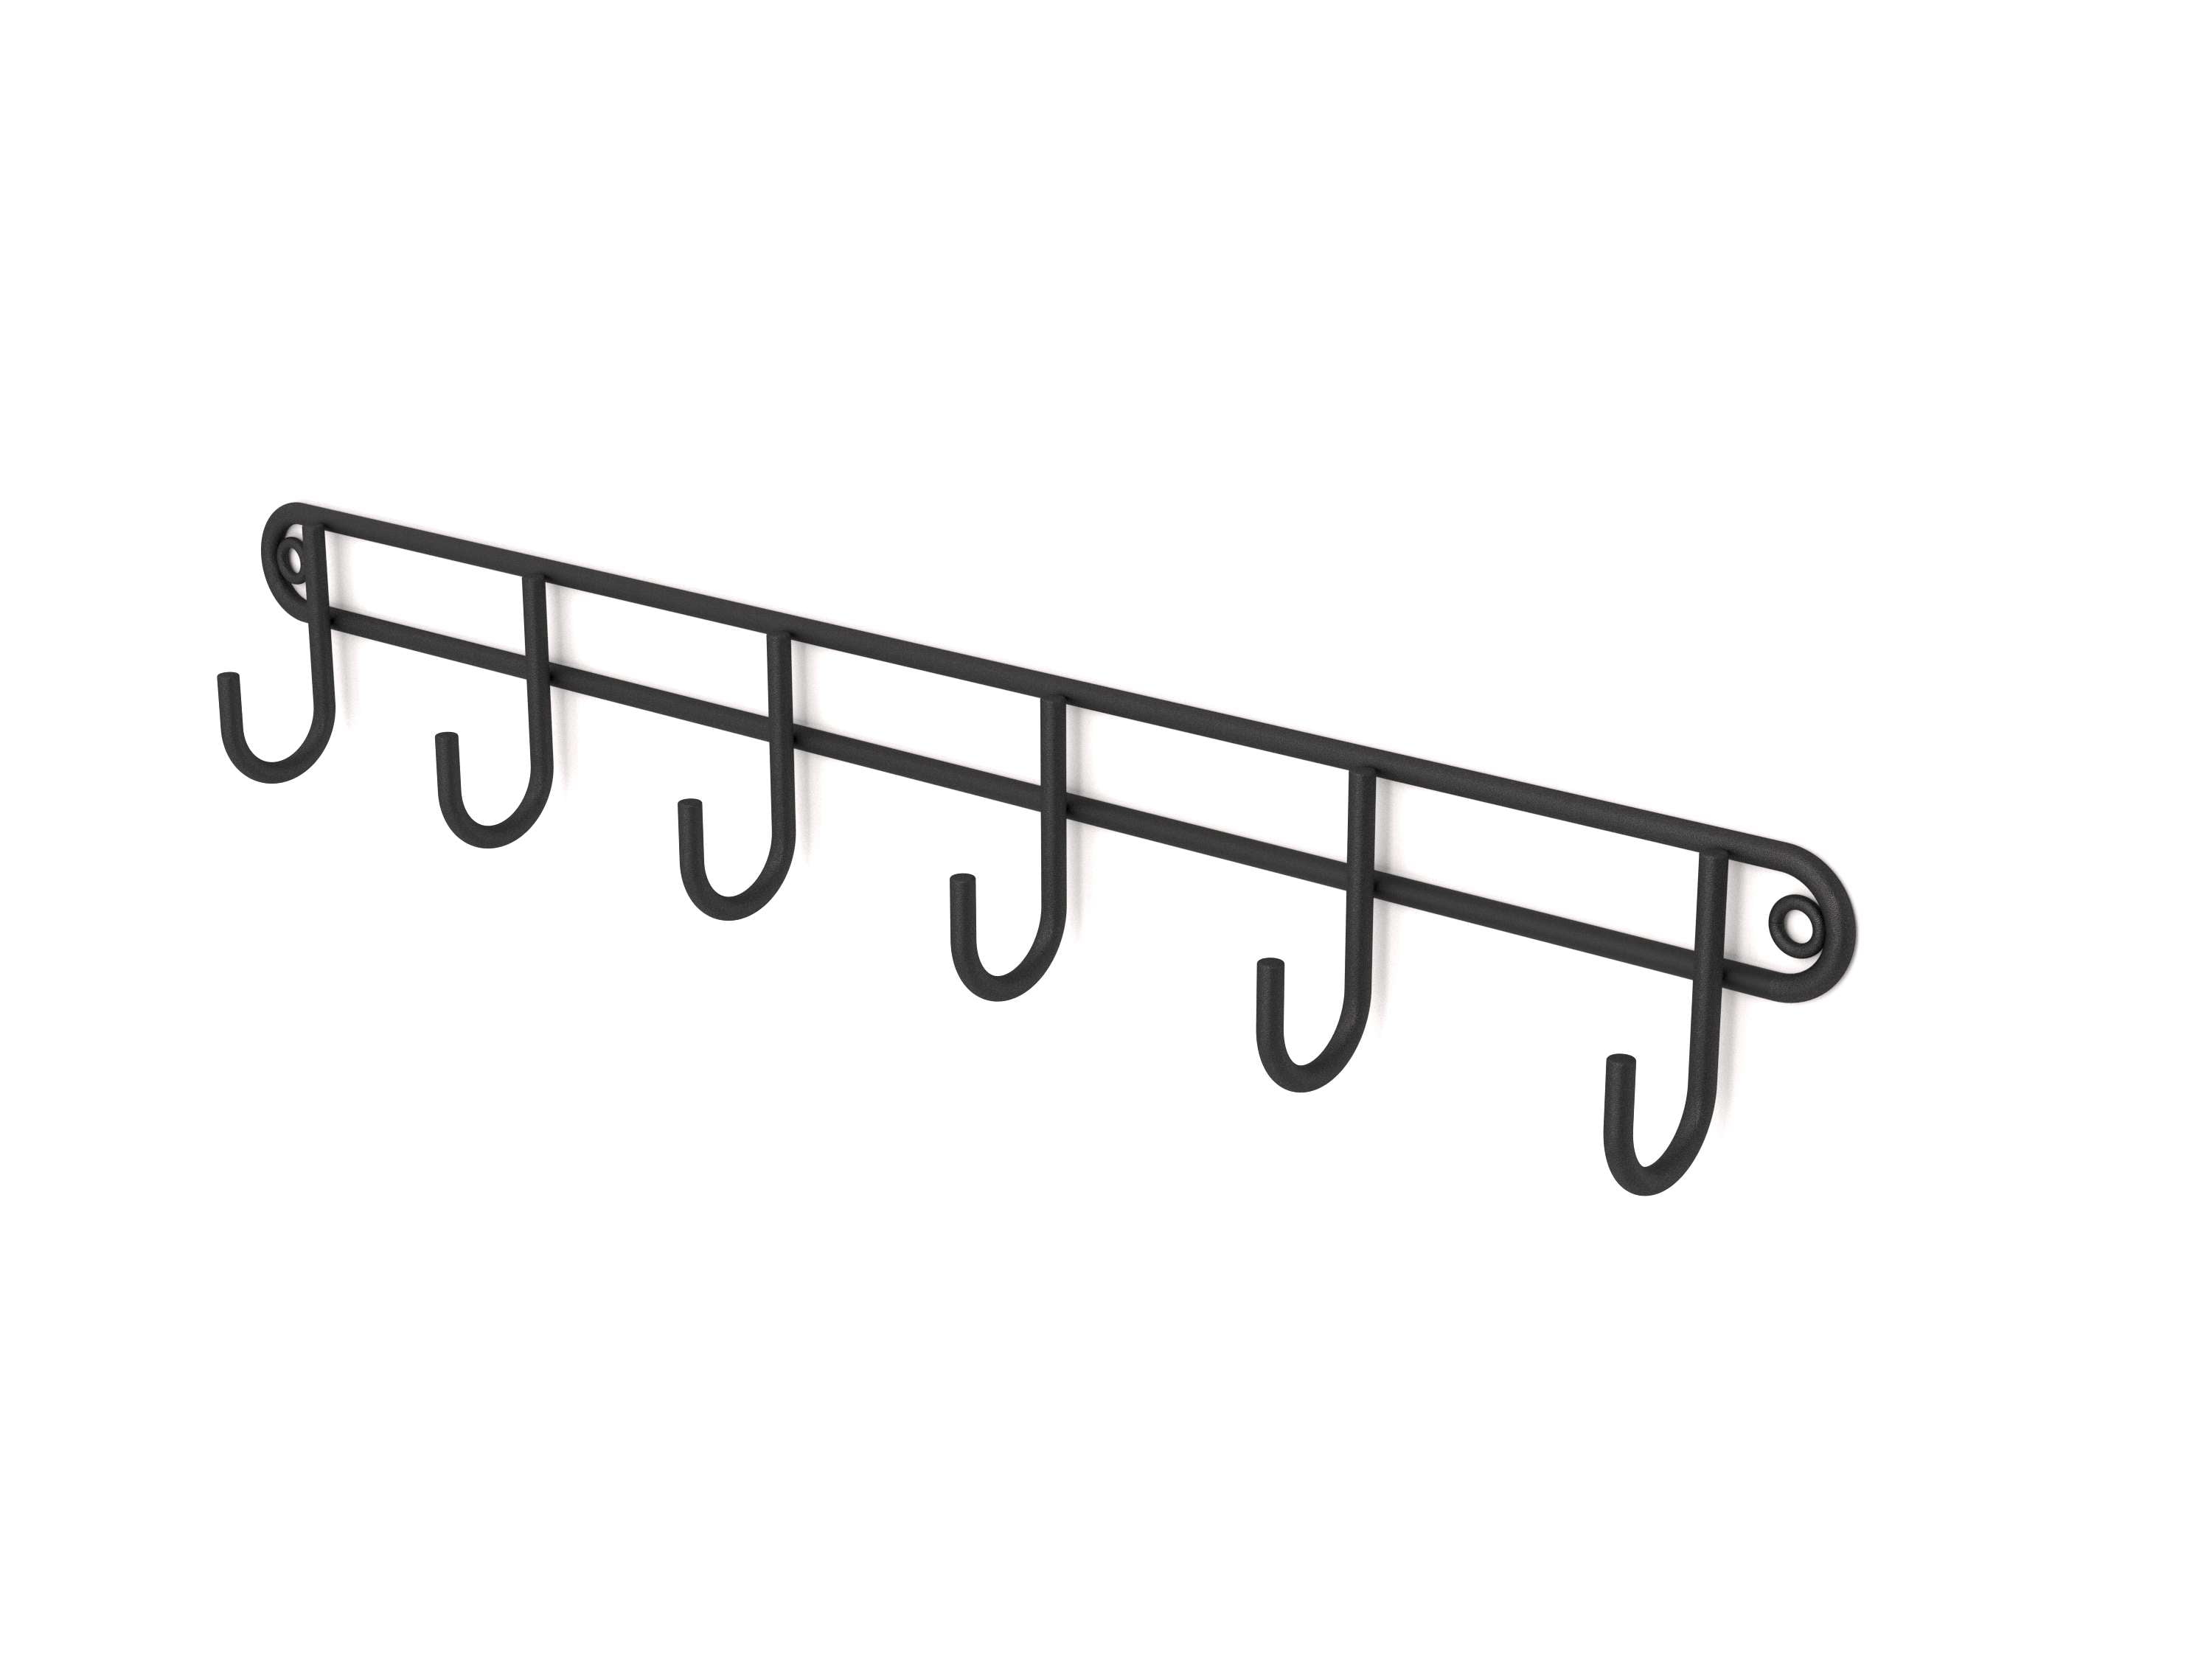 Six hook stainless steel rack useful for utensils, keys, dish cloths,  jewellery, belts and bathroom items. – Steelcraft